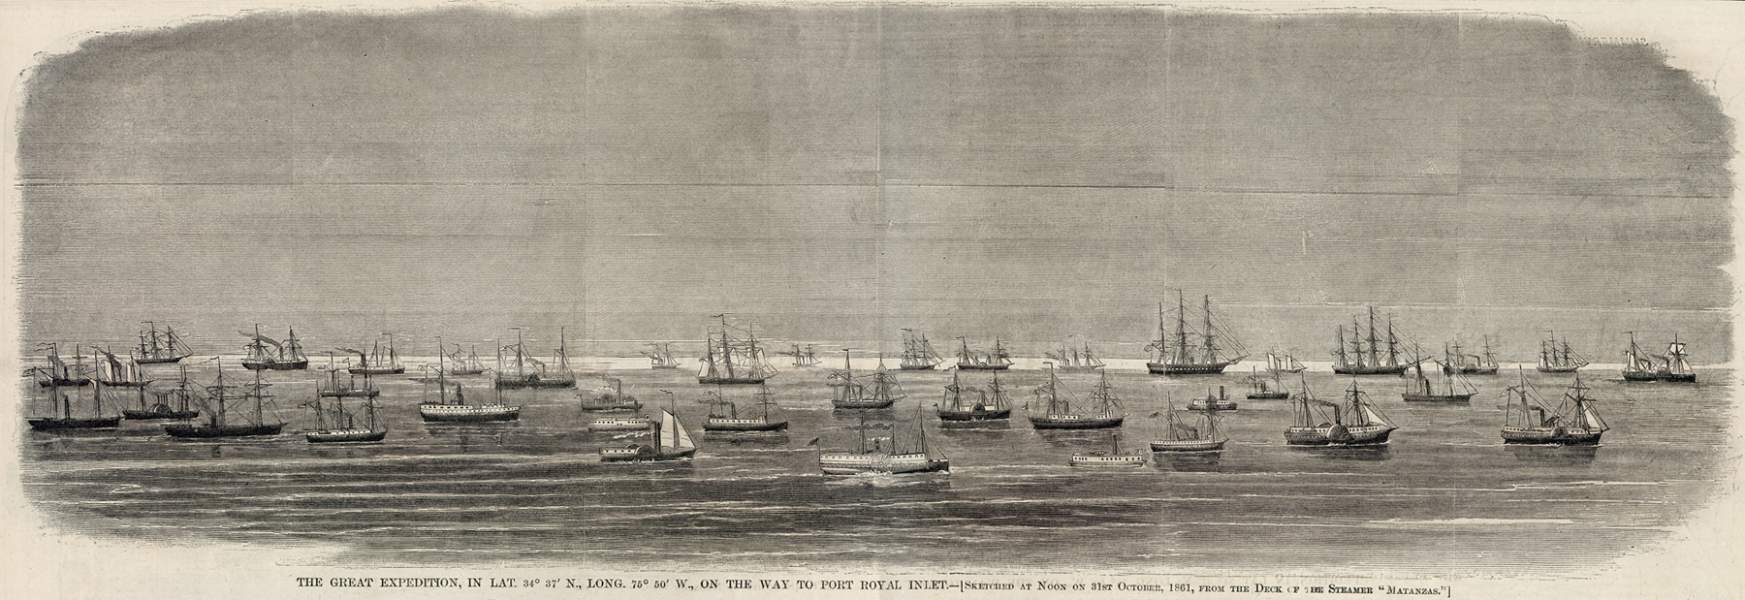 Union amphibious expedition to Port Royal, South Carolina, 1861, zoomable image